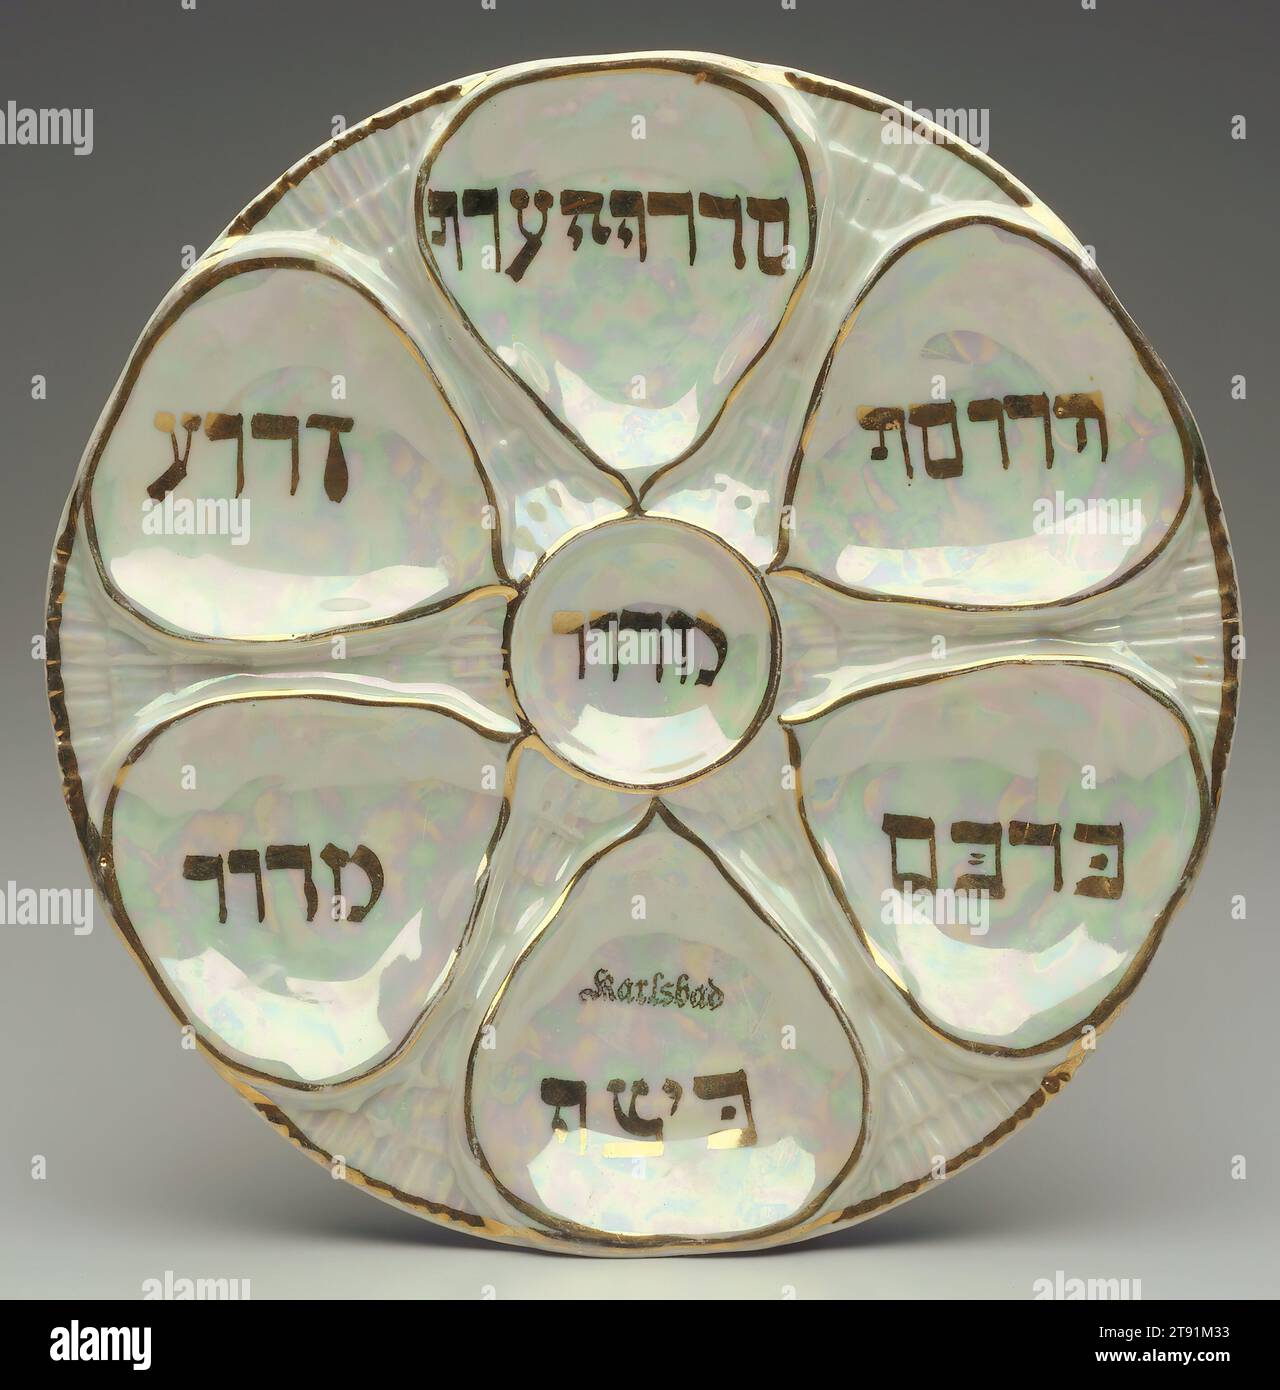 Seder plate, c. 1880-1890, 1 5/16 x 9 1/2 in. (3.33 x 24.13 cm), Ceramic, Czechoslovakia, 19th-20th century, This Seder plate was owned by a German Jewish couple who escaped from Germany in 1938 to Shanghai, China. They subsequently immigrated to the United States, where the donor obtained the plate from them Stock Photo